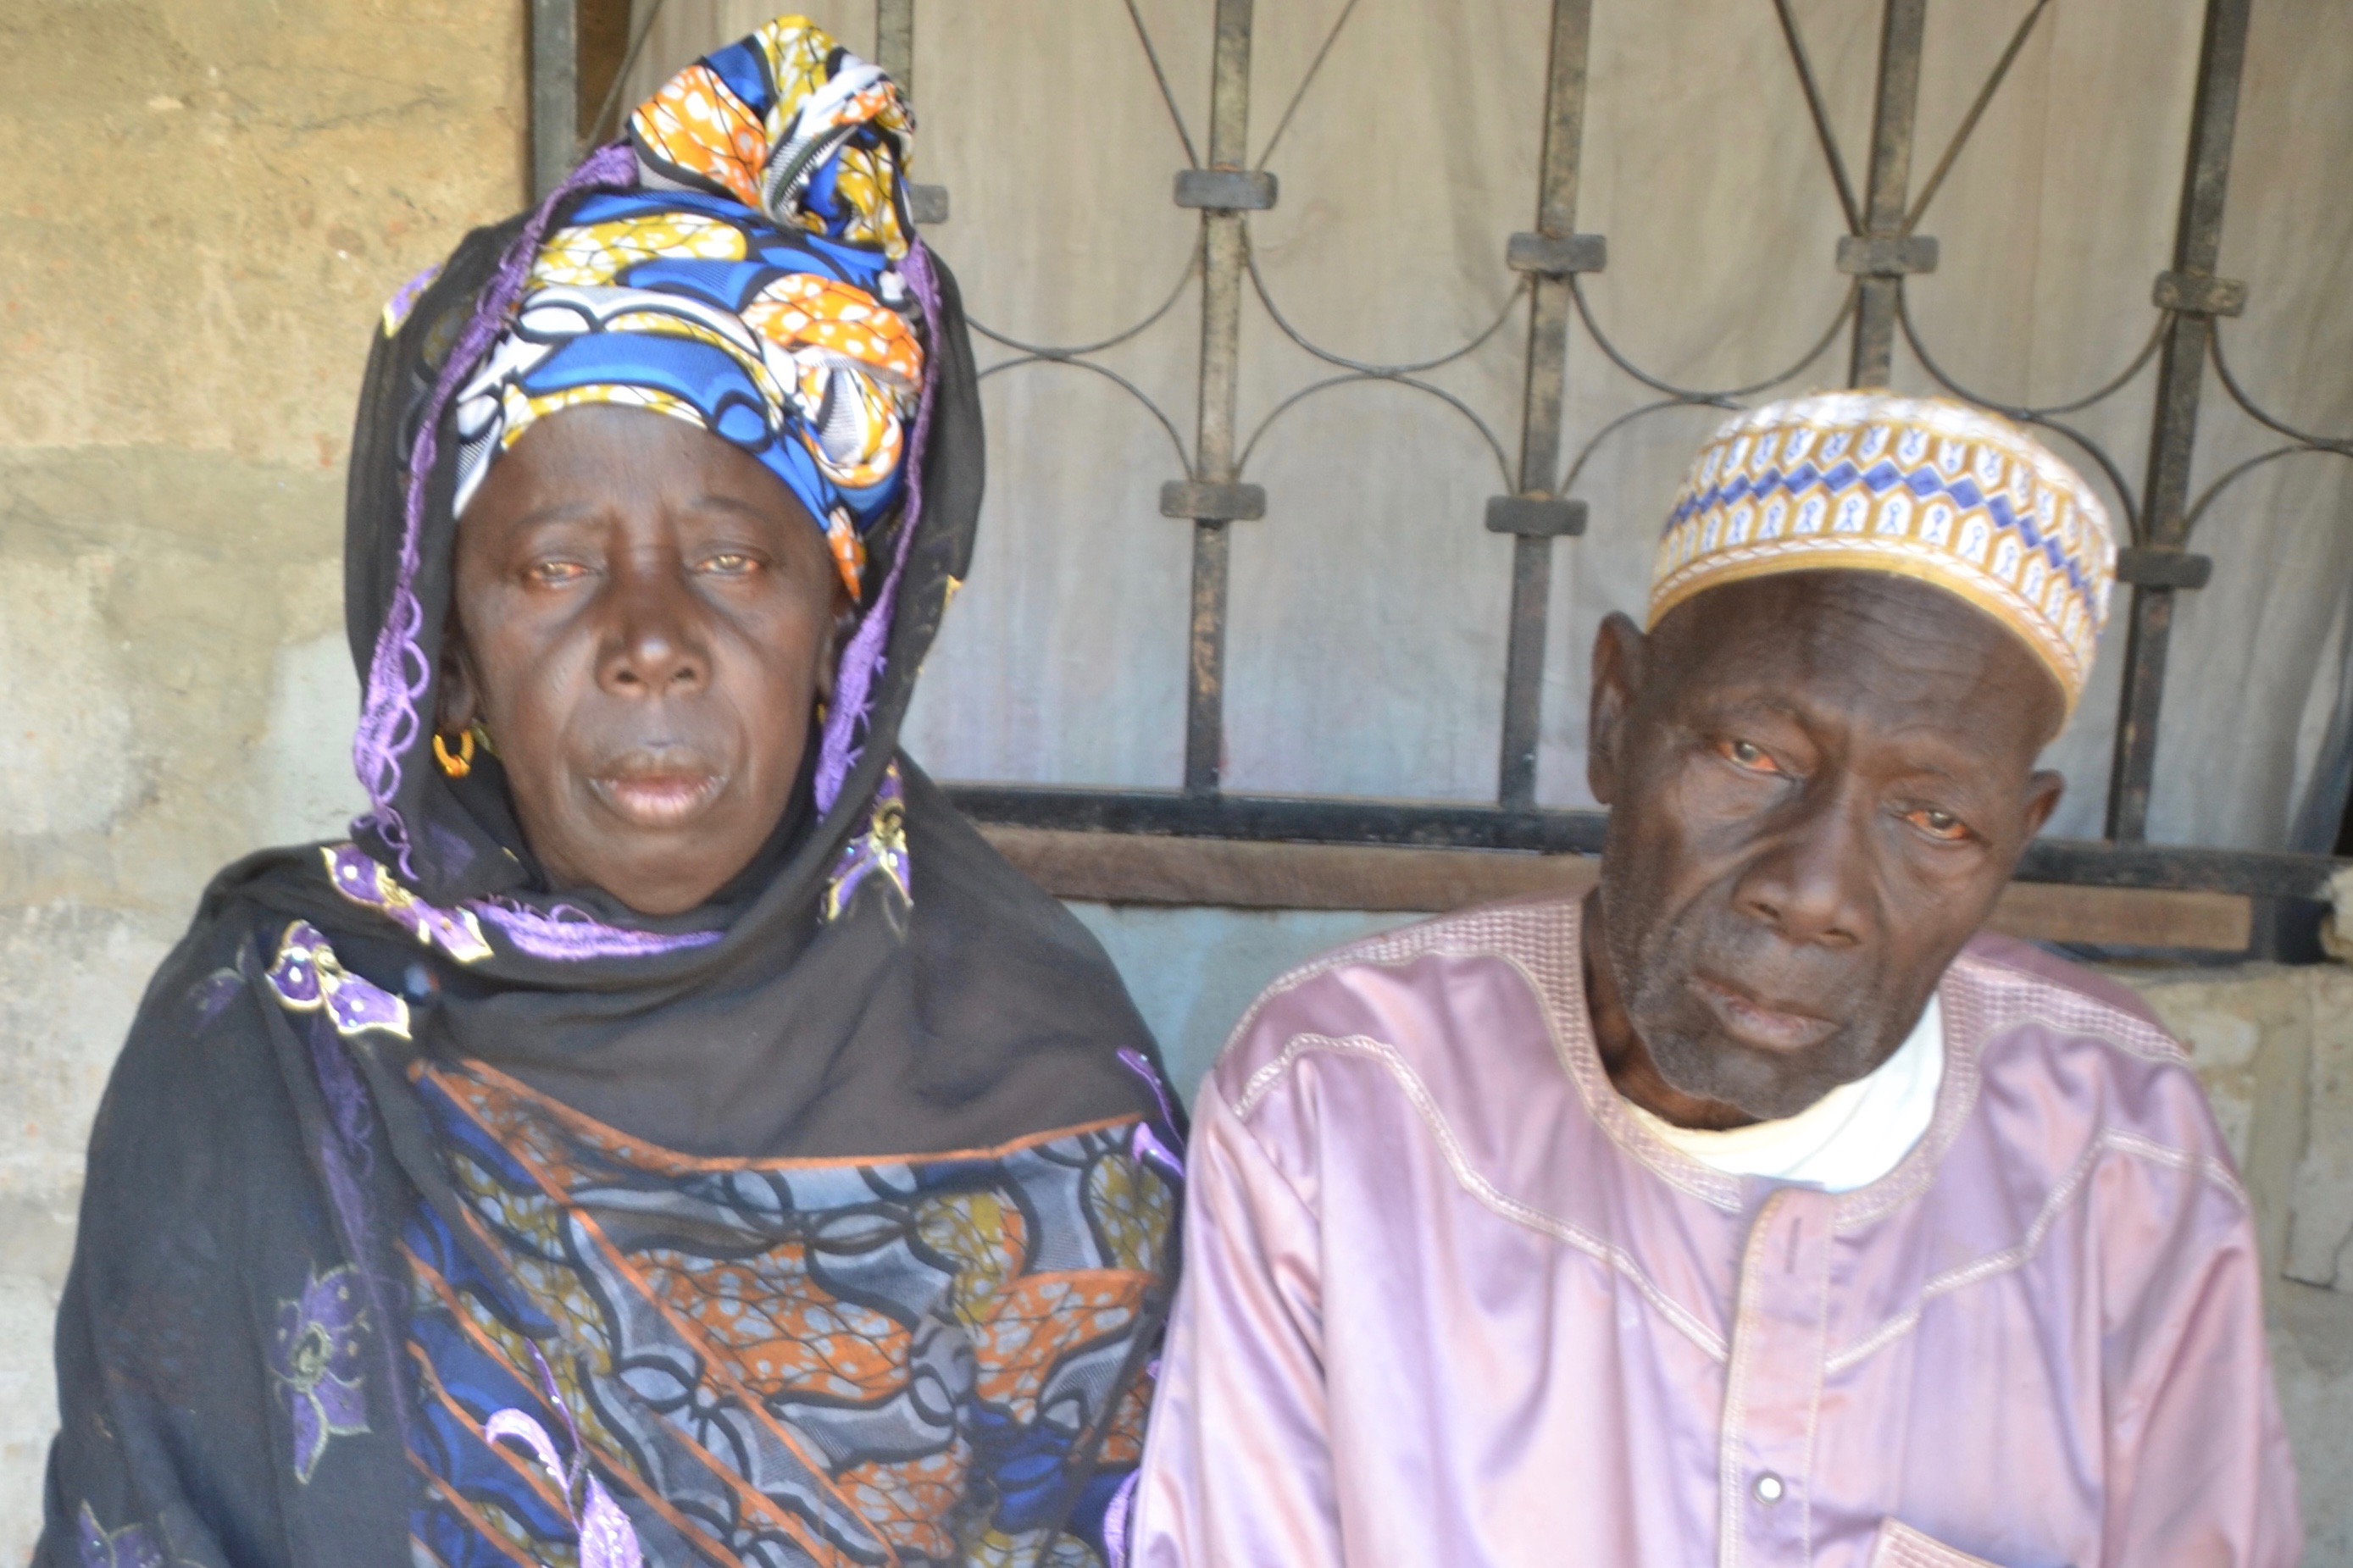 The MFWA met with the family of Chief Ebrima Manneh